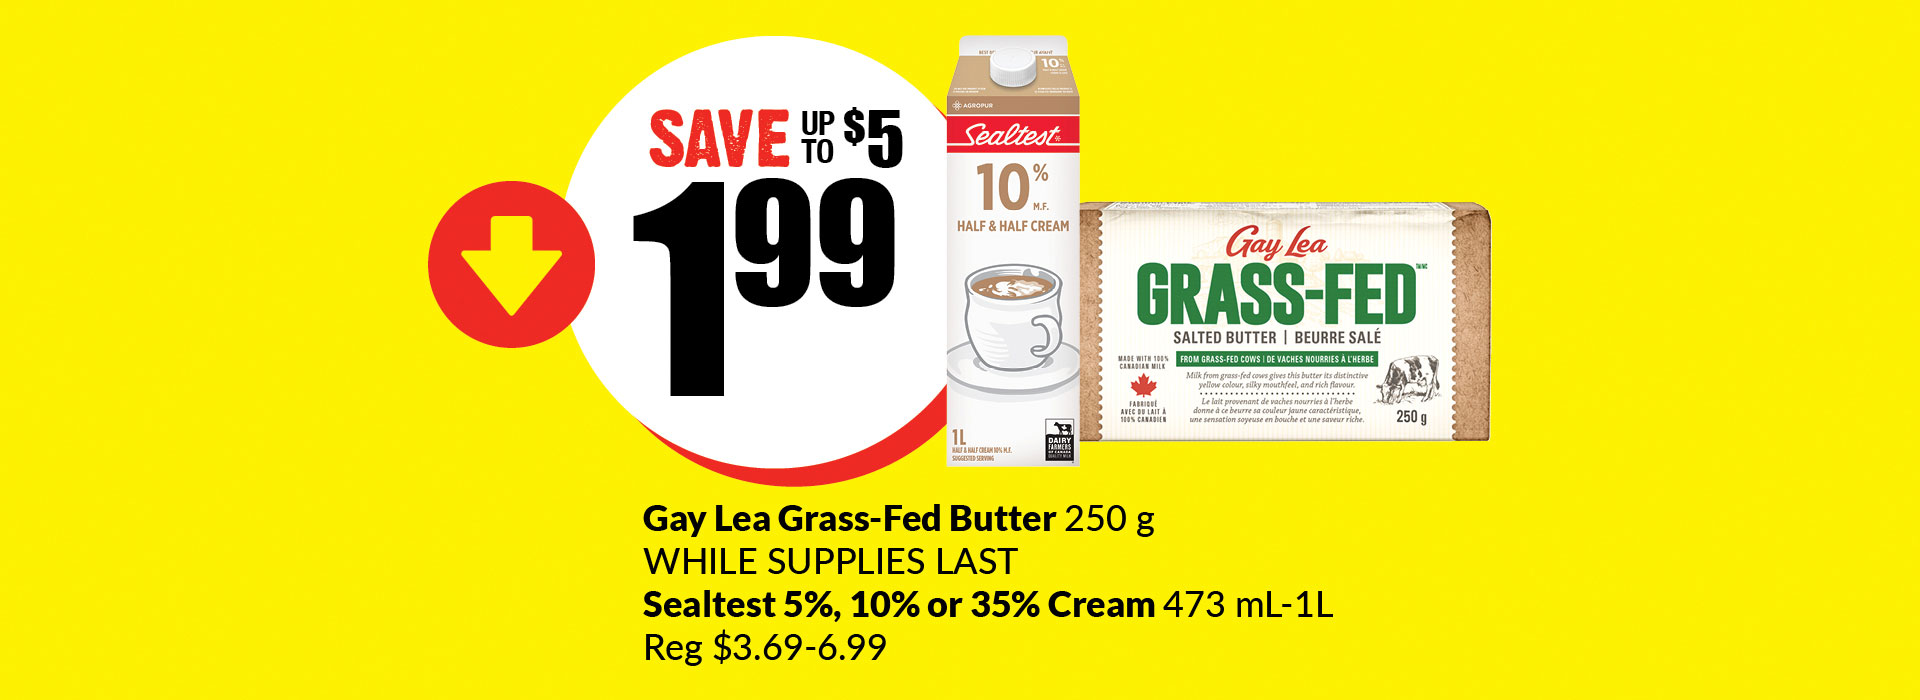 Text Reading 'Buy Gay Lea Grass-Fed Butter (250 g) and Sealtest 5%, 10% or 35% Cream (473 mL-1L) for just $1.99 and save up to $5.'